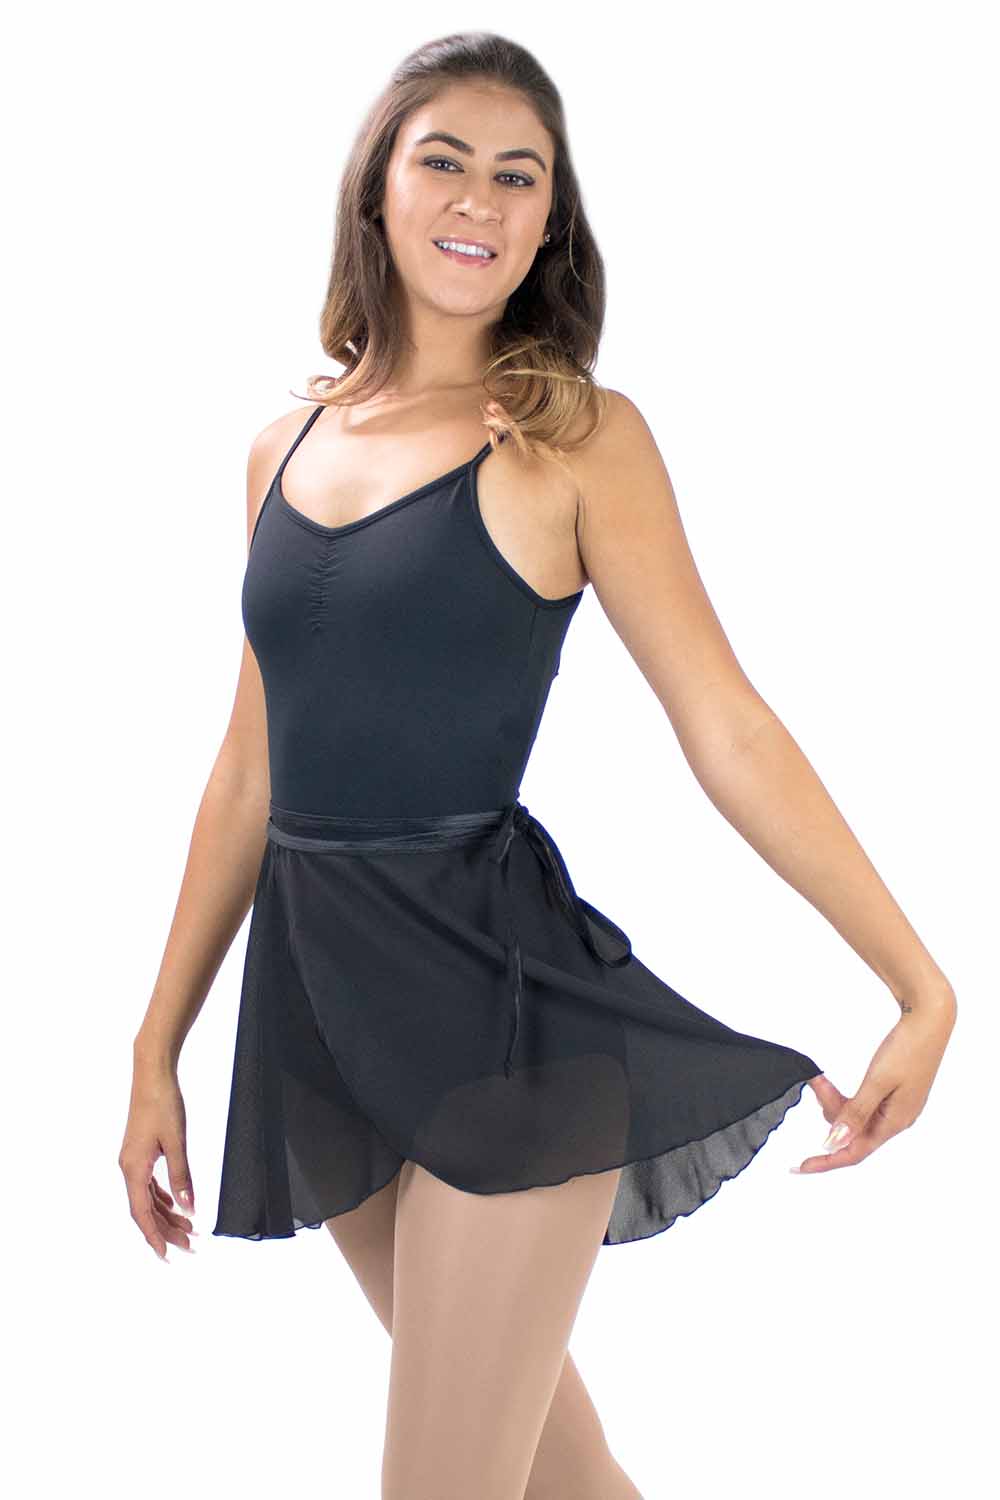 Body Wrappers Adult Skirt Size Chart – Dancewear Online